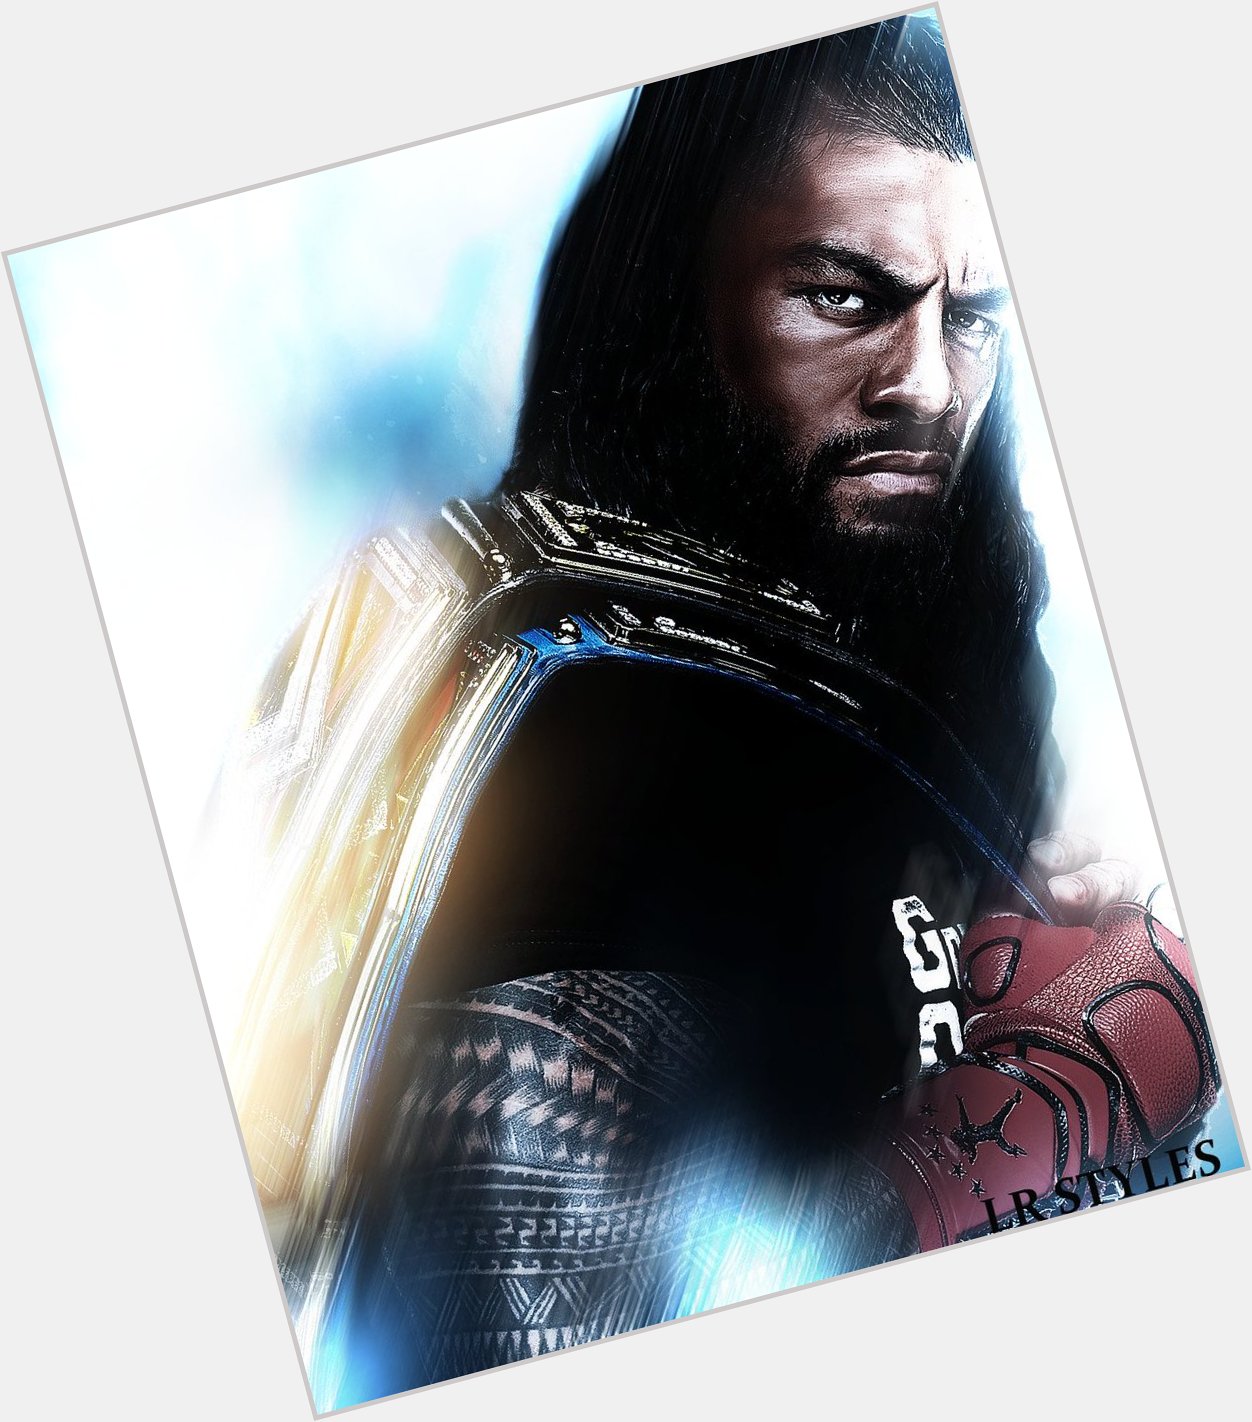 Happy Birthday to the Best Pro Wrestler The Tribal Chief Roman Reigns    